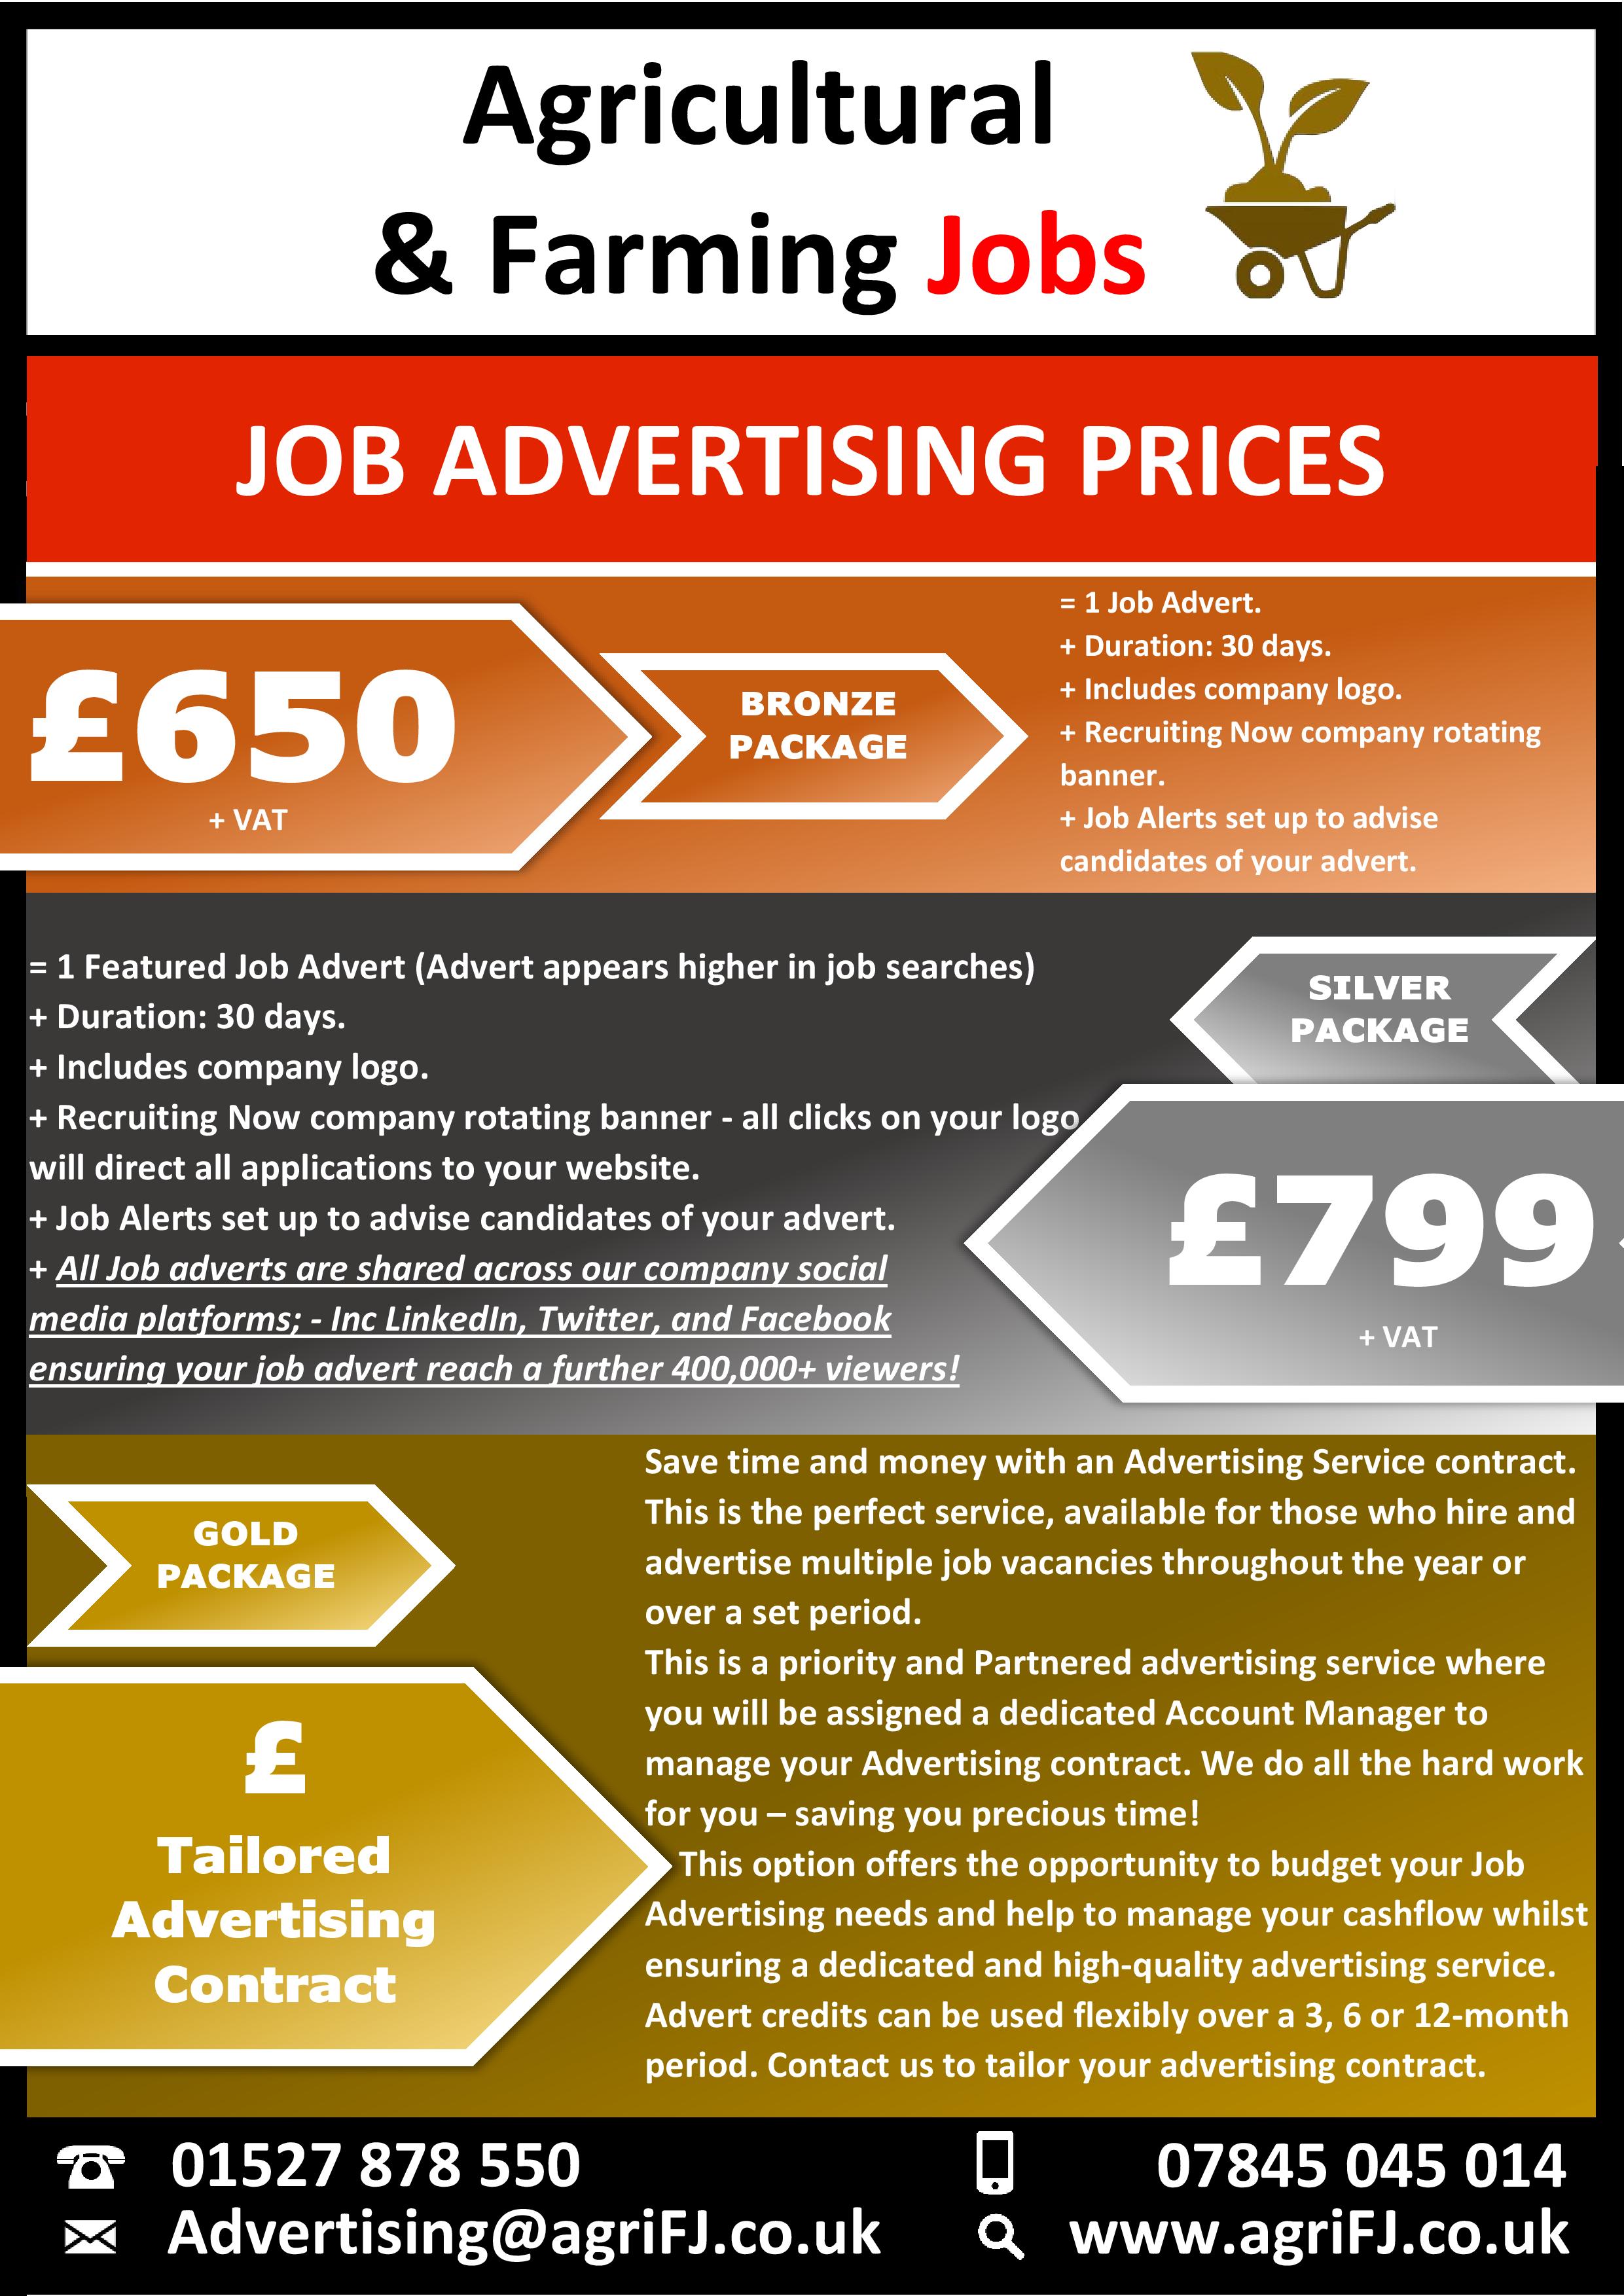 Jobs Board Advertising Packages and Prices